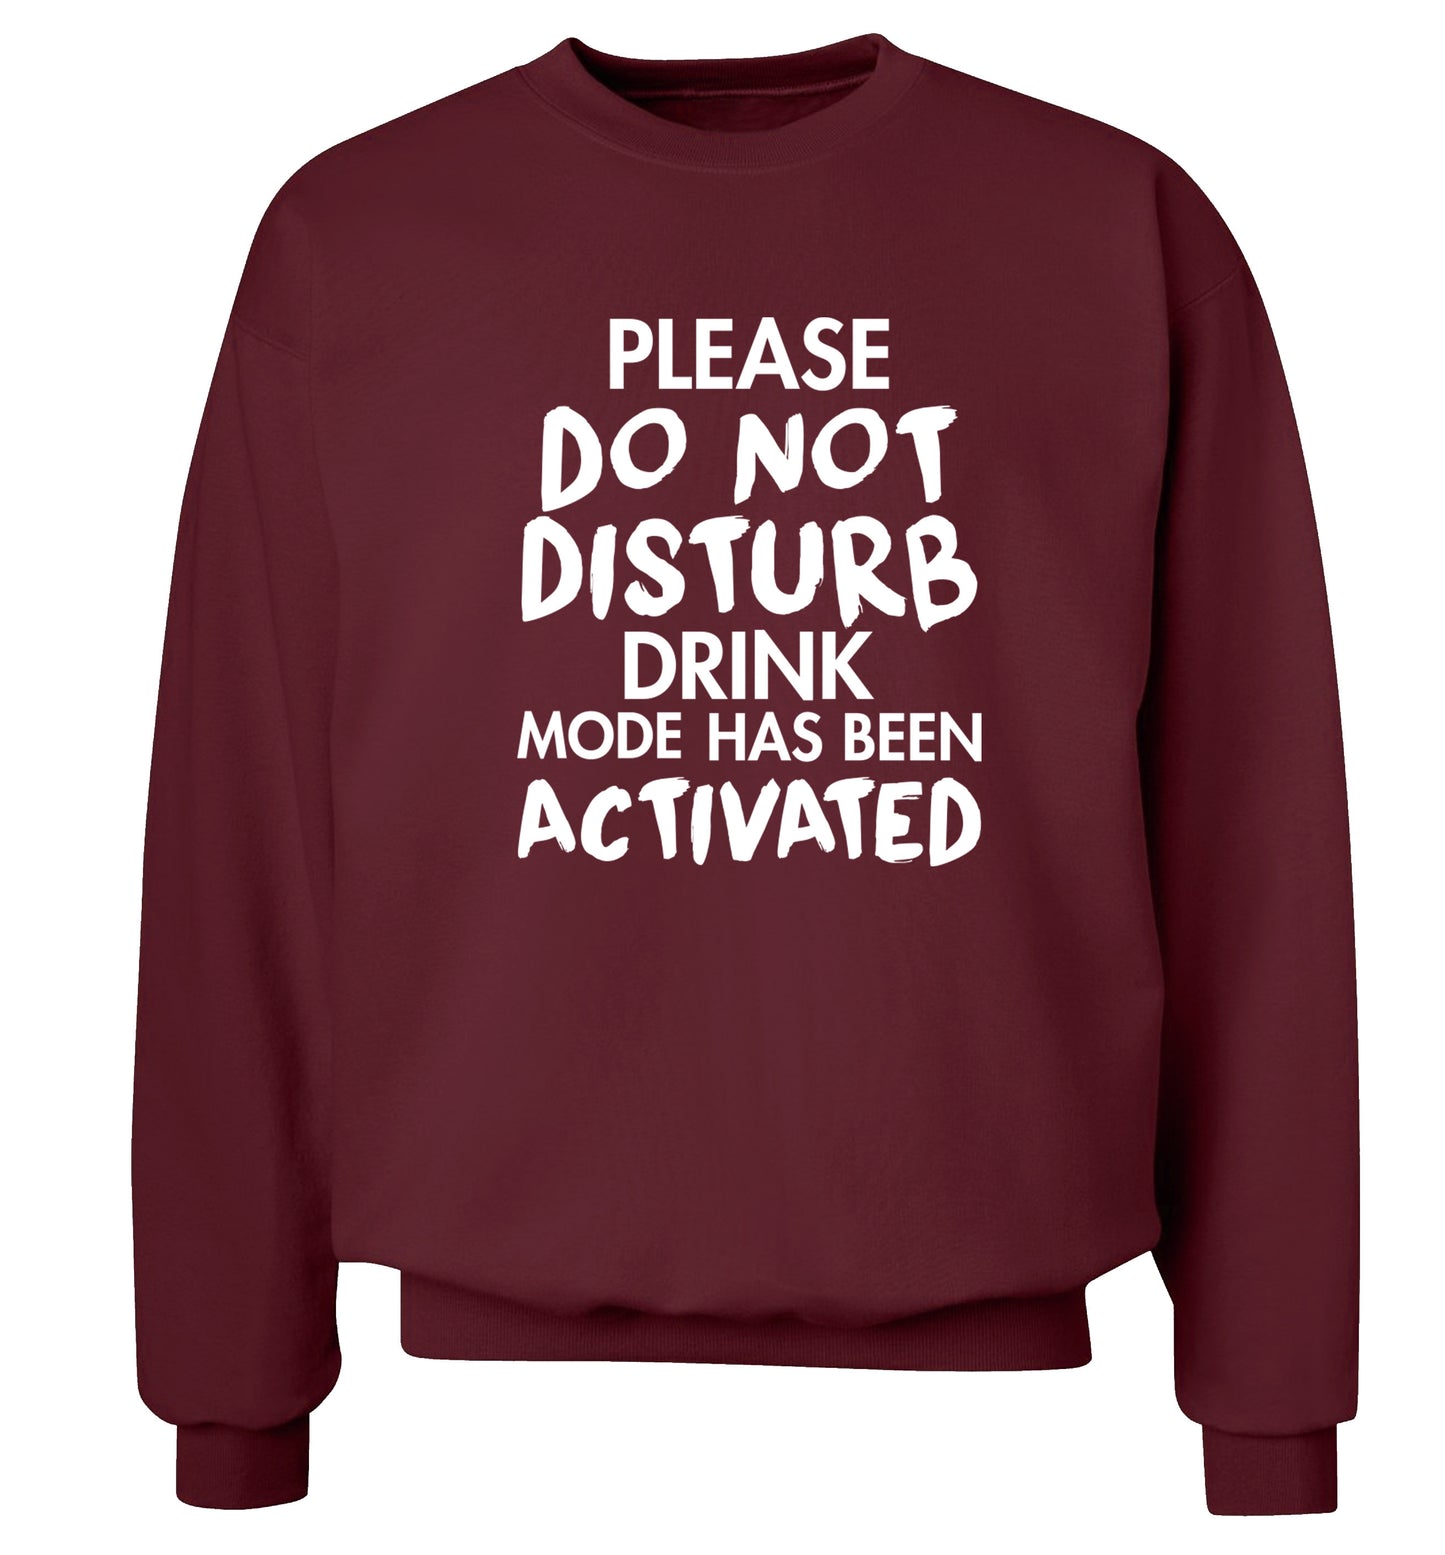 Please do not disturb drink mode has been activated Adult's unisex maroon Sweater 2XL